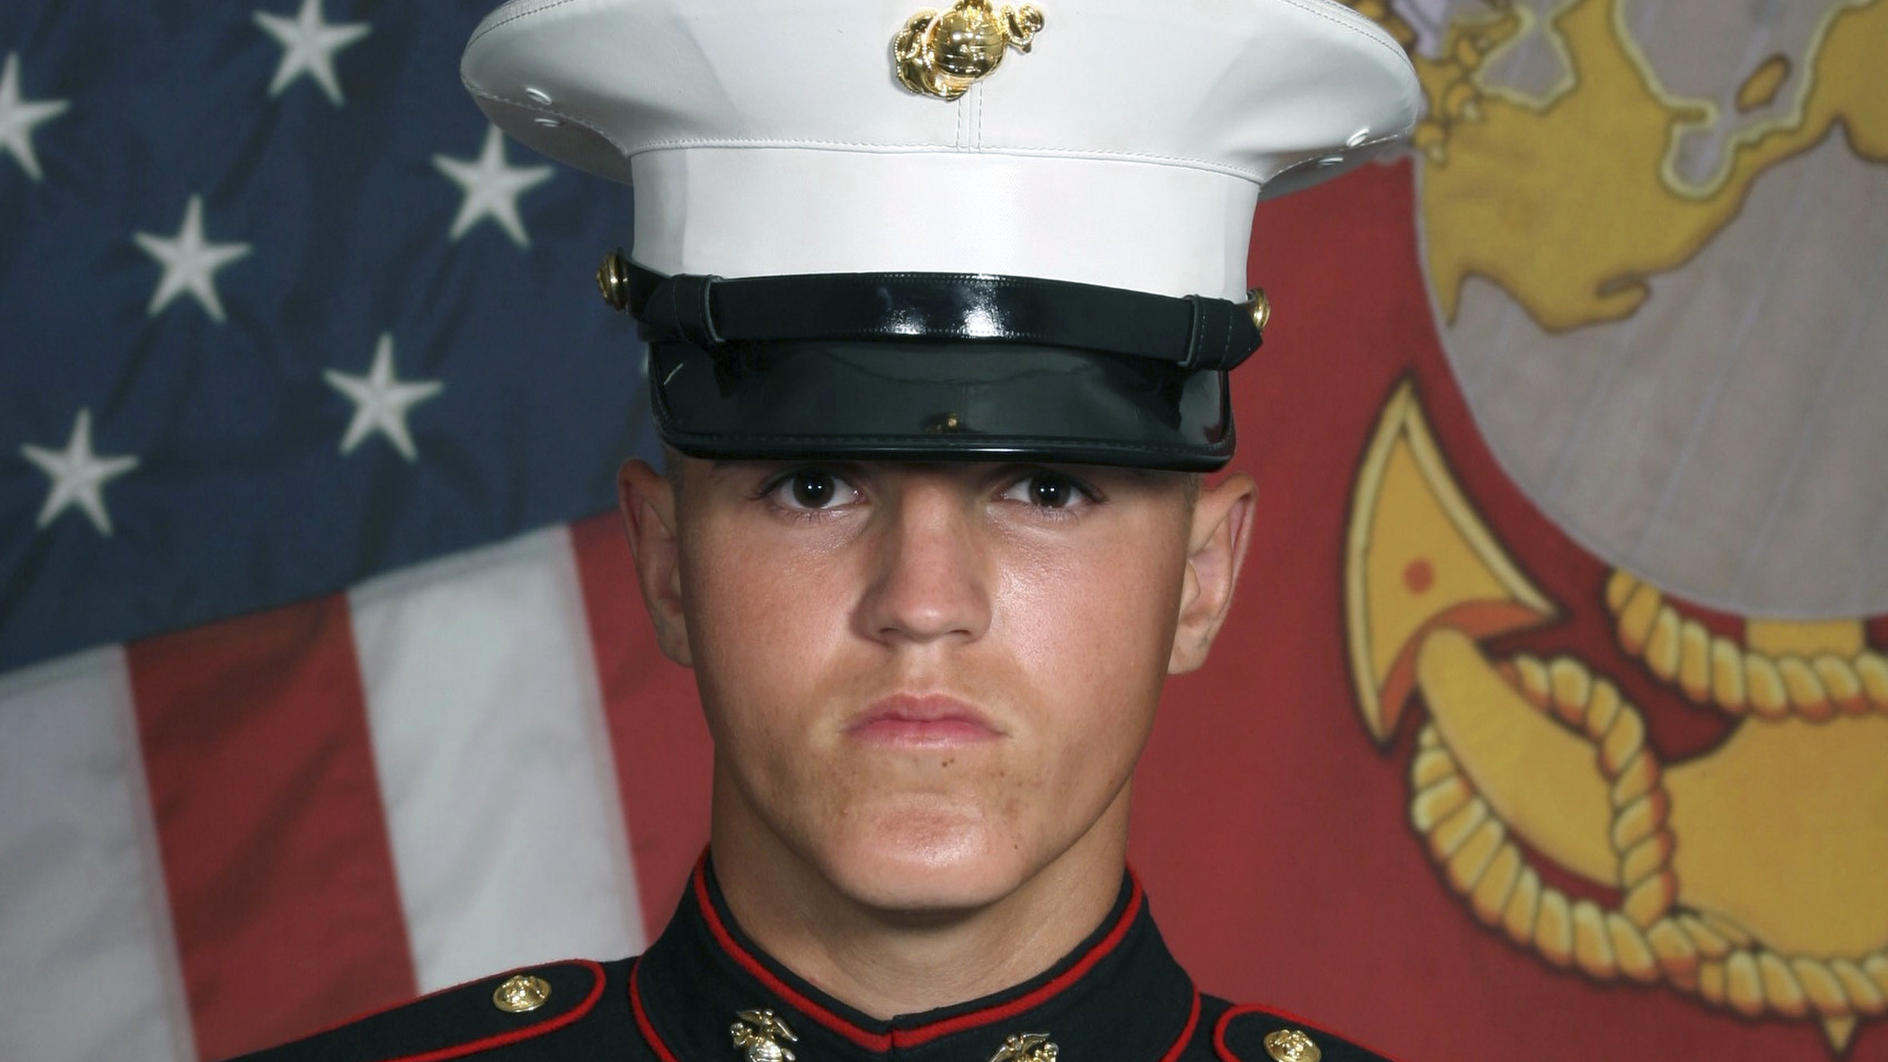 This undated photo released by the 1st Marine Division, Camp Pendleton/U.S. Marines shows Marine Corps Lance Cpl. Rylee J. McCollum, 20, of Jackson, Wyo Eleven Marines, one Navy sailor and one Army soldier were among the dead, while 18 other U.S. ser